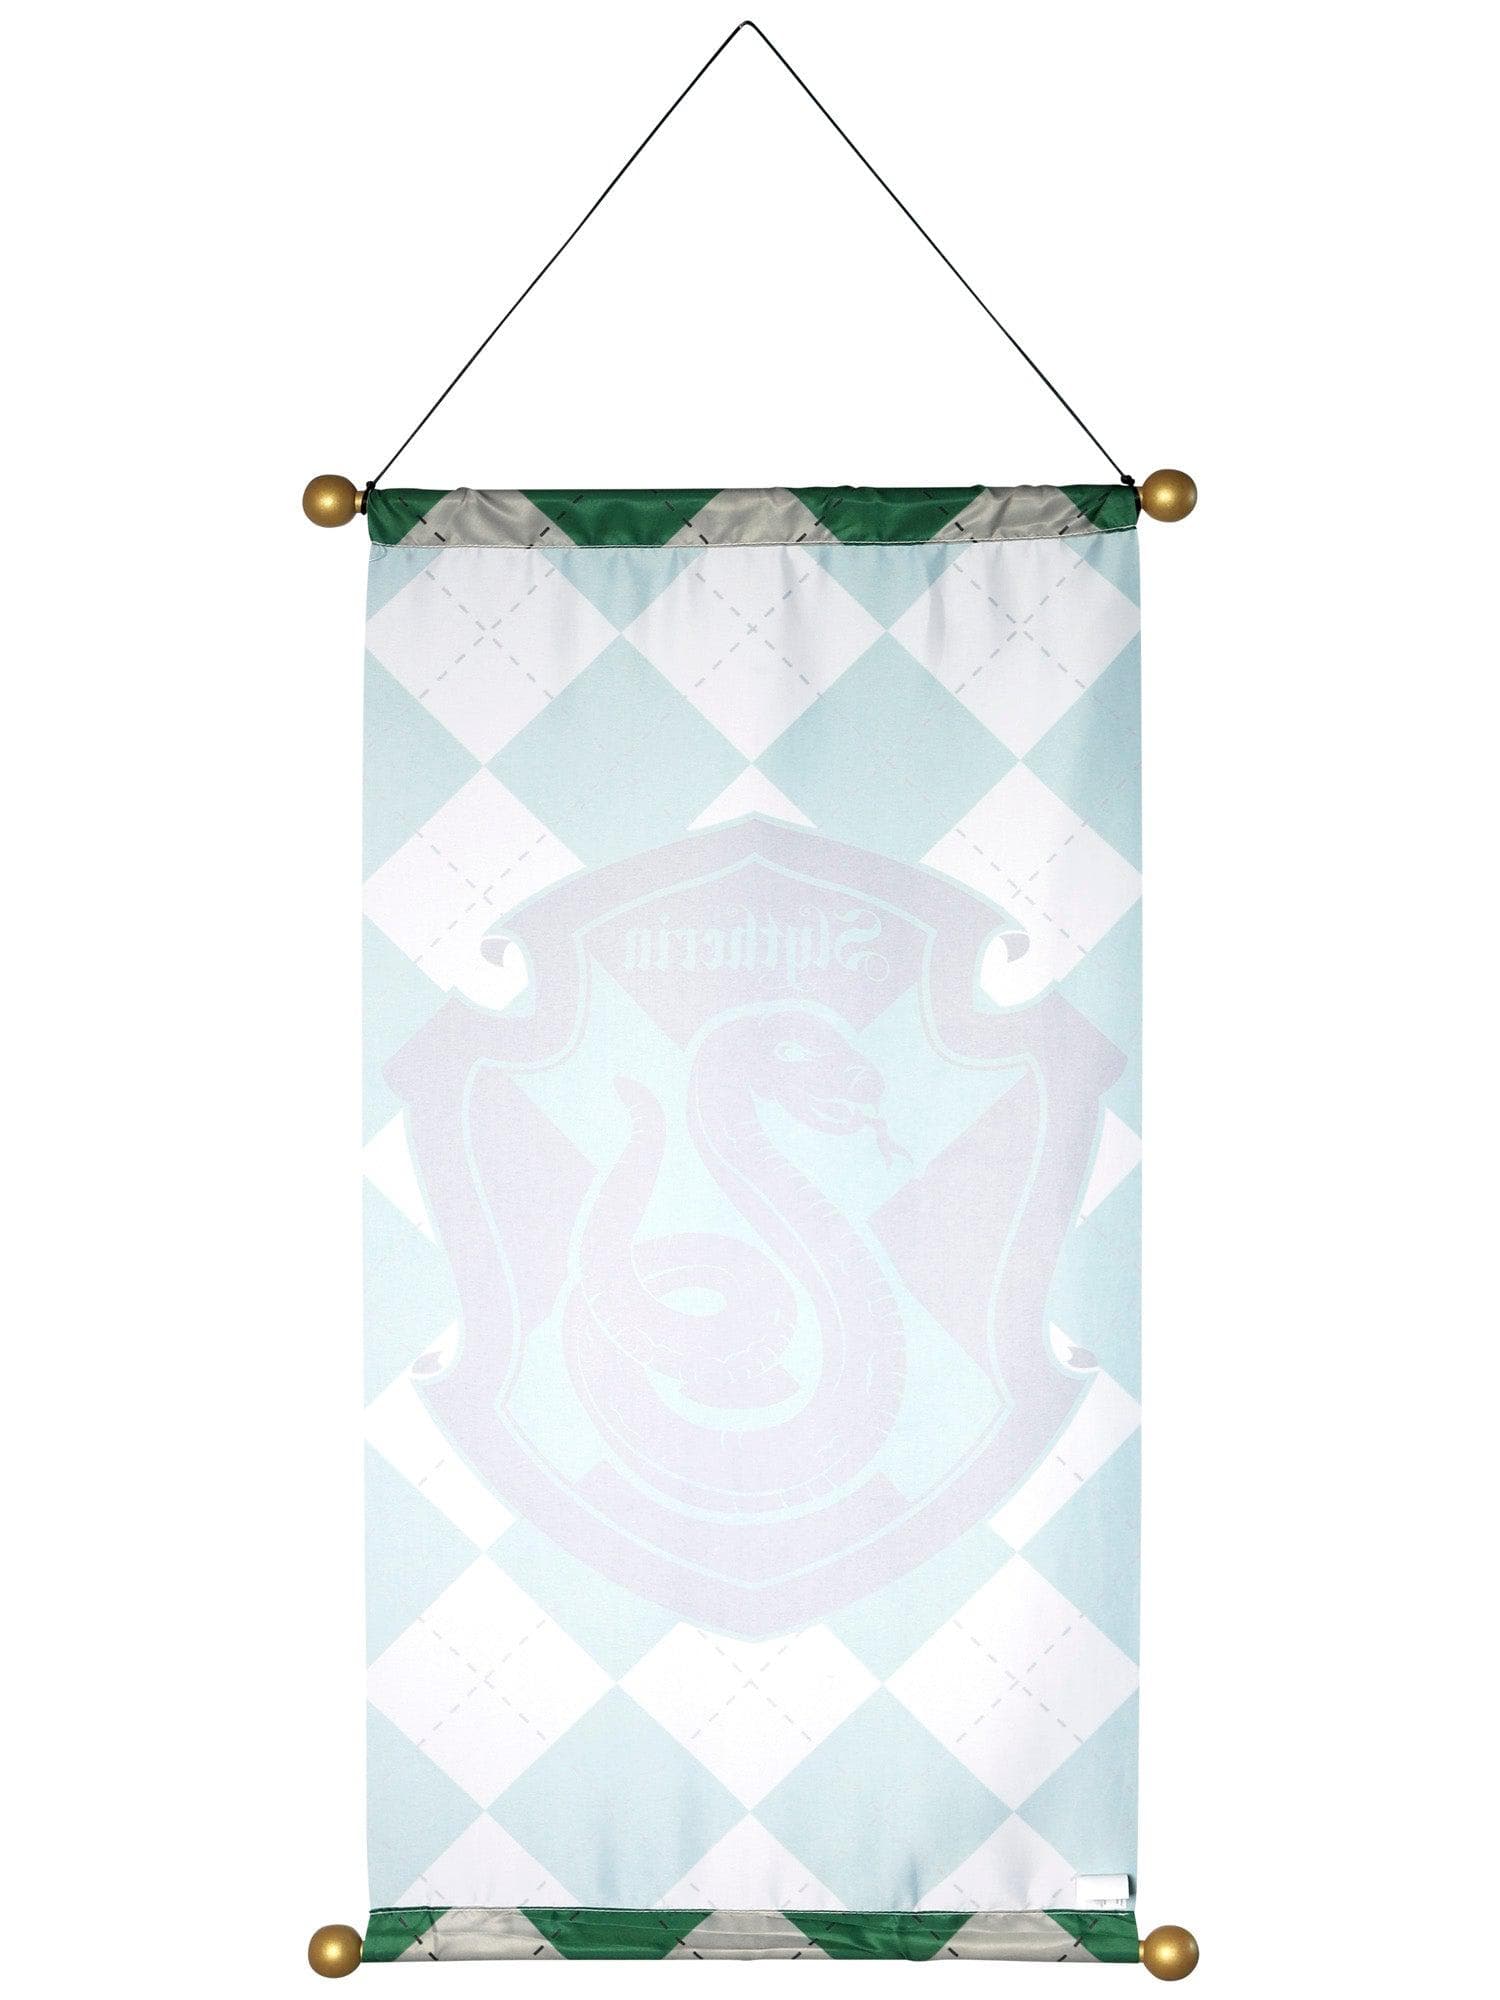 33-inch Harry Potter Slytherin House Banner - costumes.com